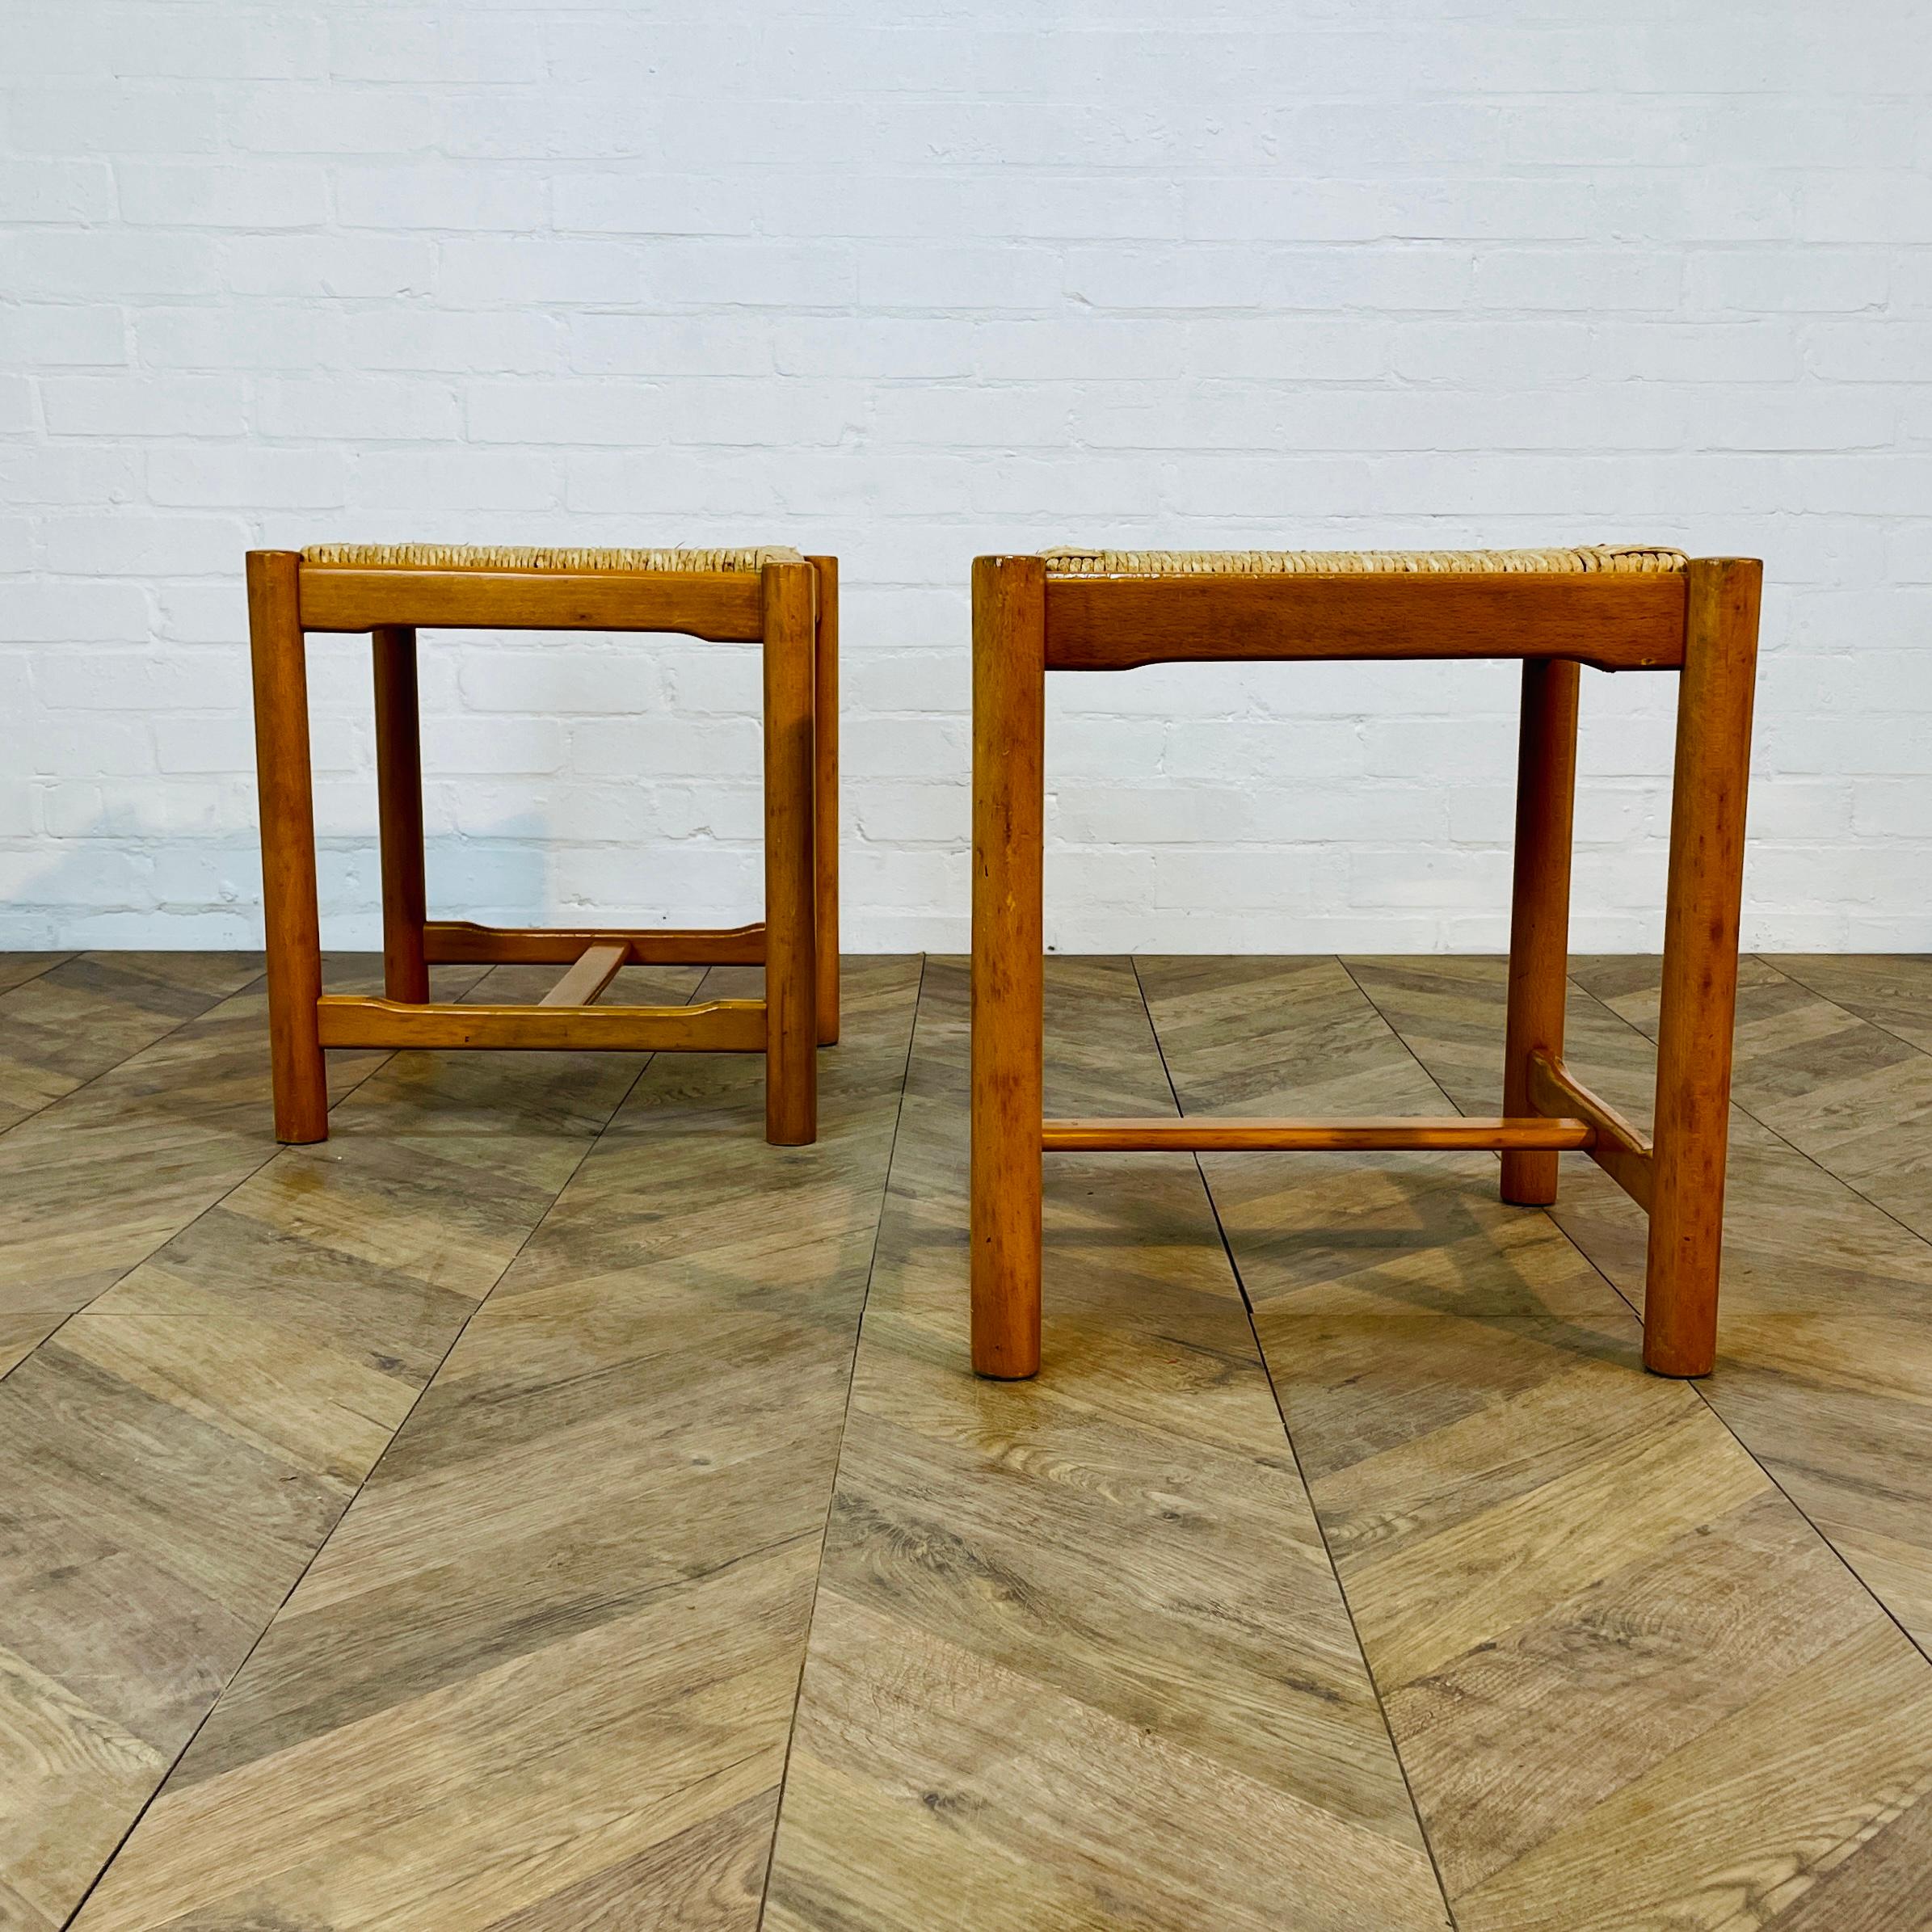 Vintage Mid Century Italian Stools, After Vico Magistretti, Set of 2, circa 1970 For Sale 2